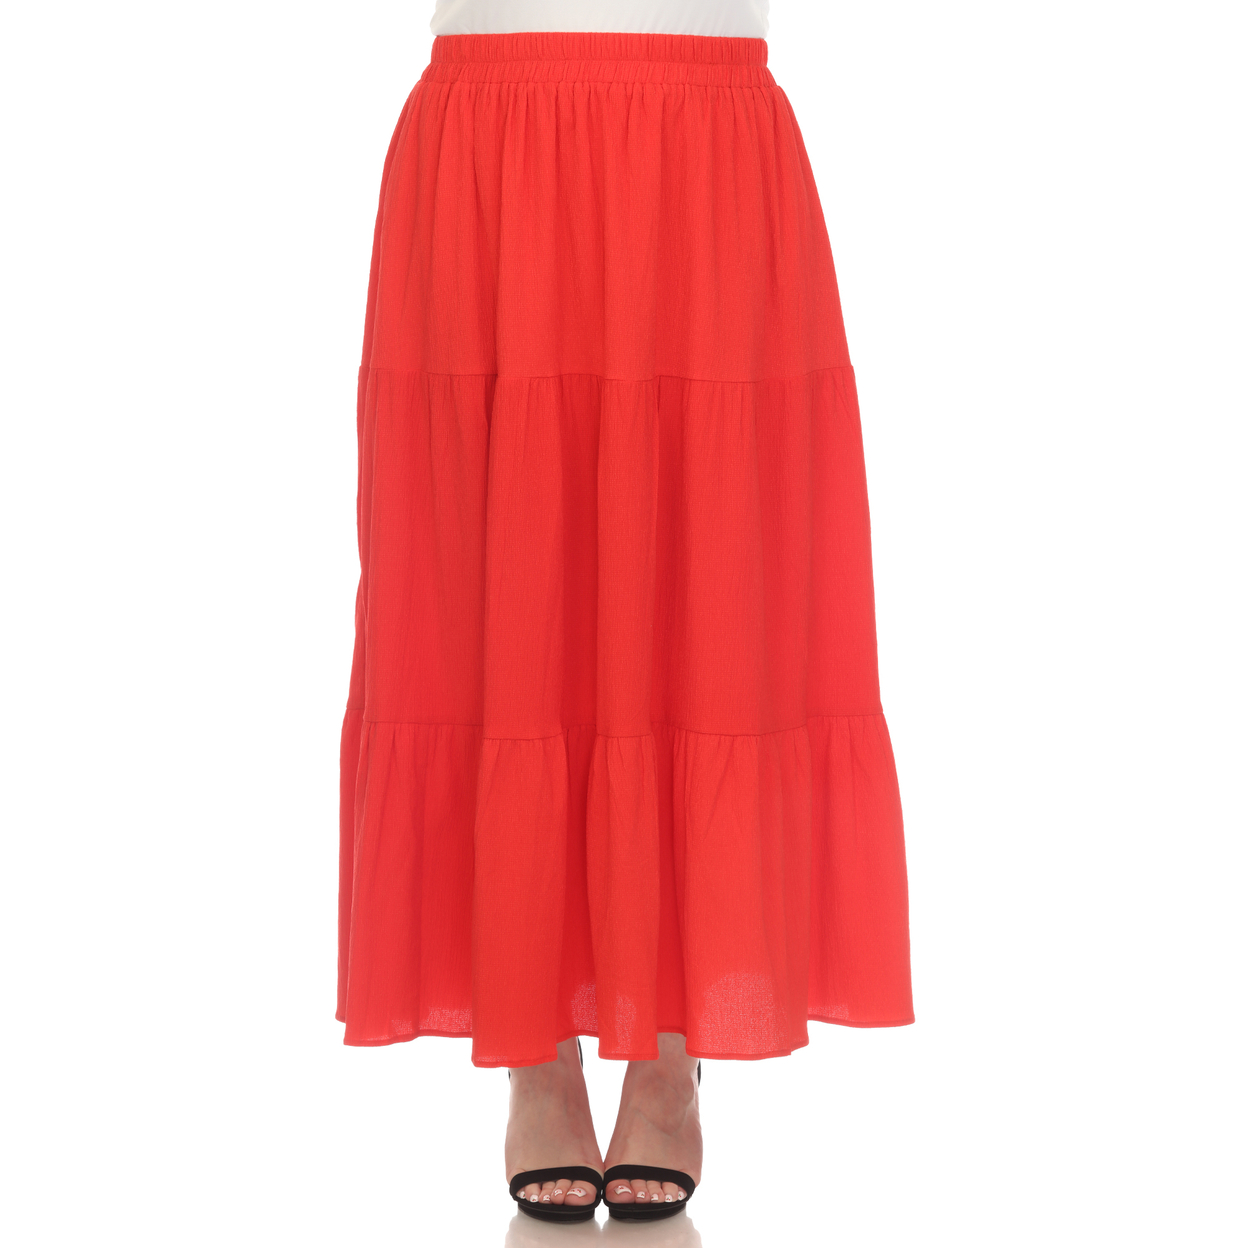 White Mark Women's Pleated Tiered Maxi Skirt - Red, 2x